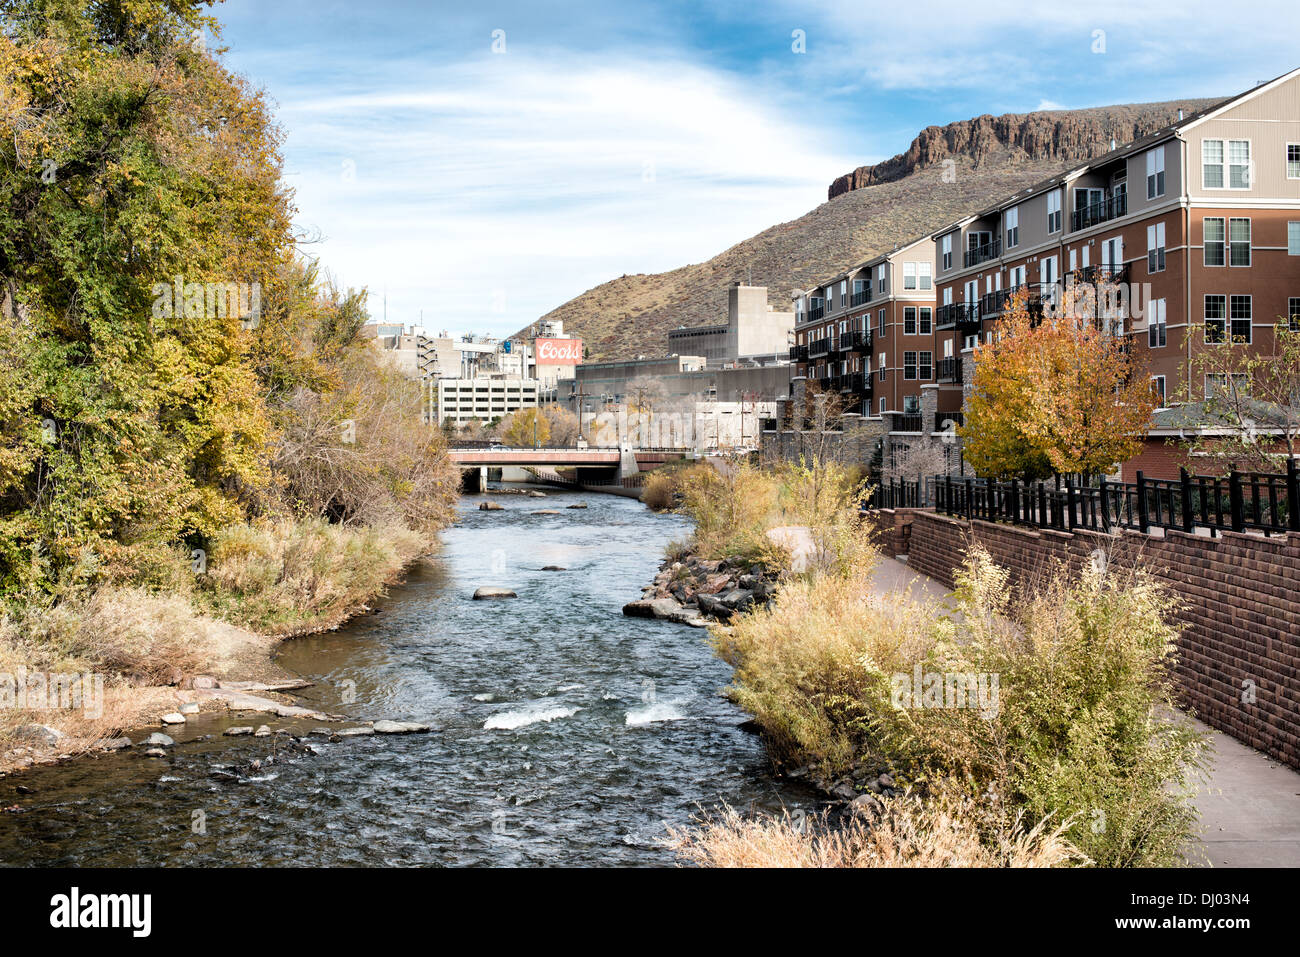 GOLDEN, Colorado - Clear Creek in Golden, Colorado, runs to the Coors Brewery which can be seen in the distance, with part of Table Mountain visible in the background at right. Founded during the Pike's Peak Gold Rush, Golden today is known for its rich heritage, outdoor activities, and being the birthplace of Coors Brewery, embodying a unique blend of history, culture, and natural beauty. Stock Photo